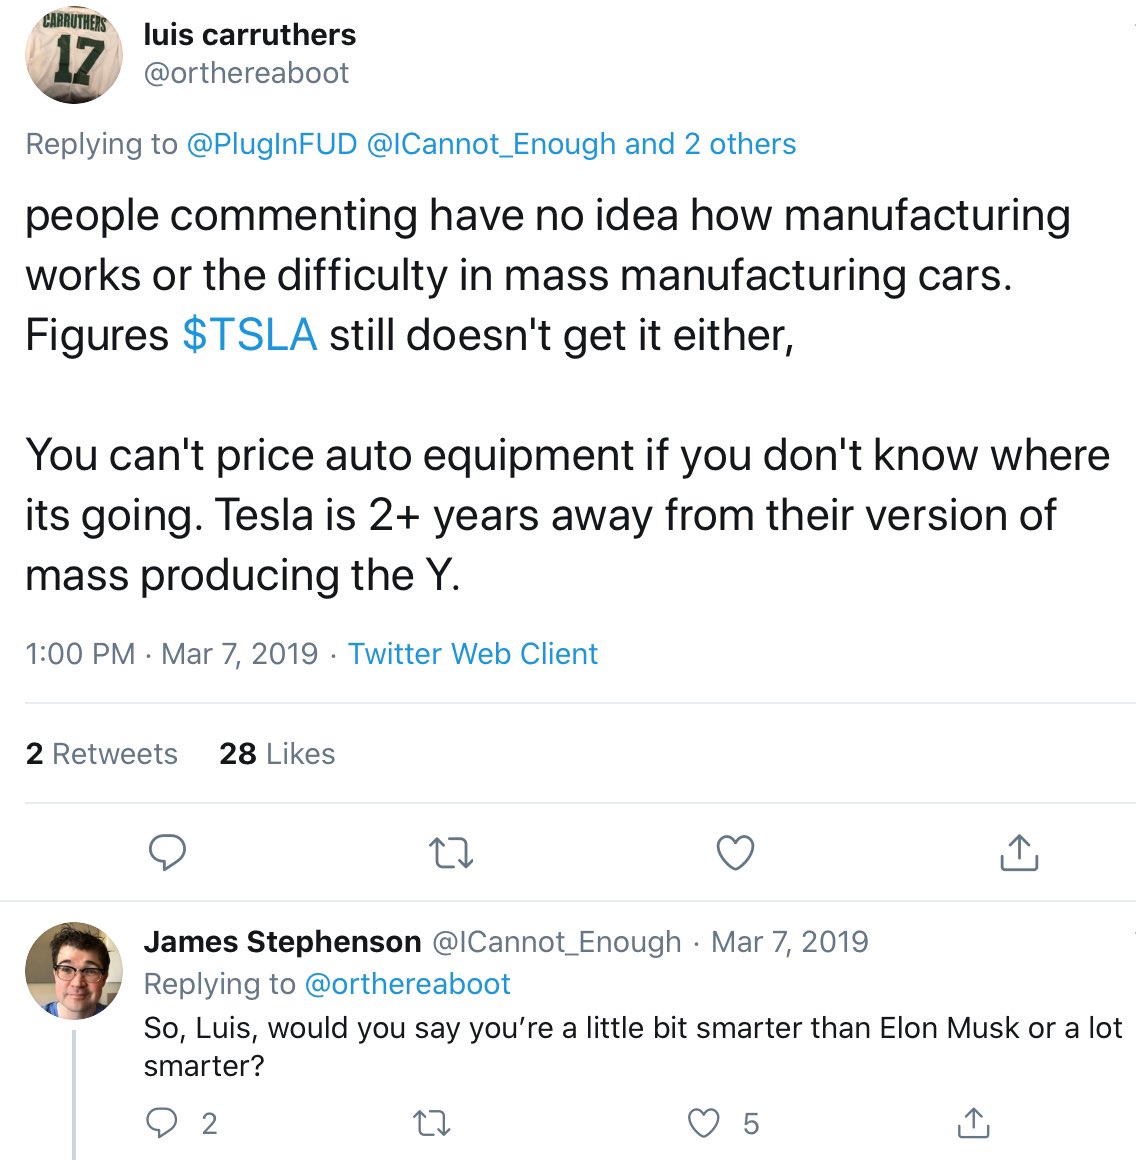  @orthereaboot :“Tesla is 2+ years away from their version of mass producing the Y”— “Luis Carruthers” (pseudonym), March 7, 2019